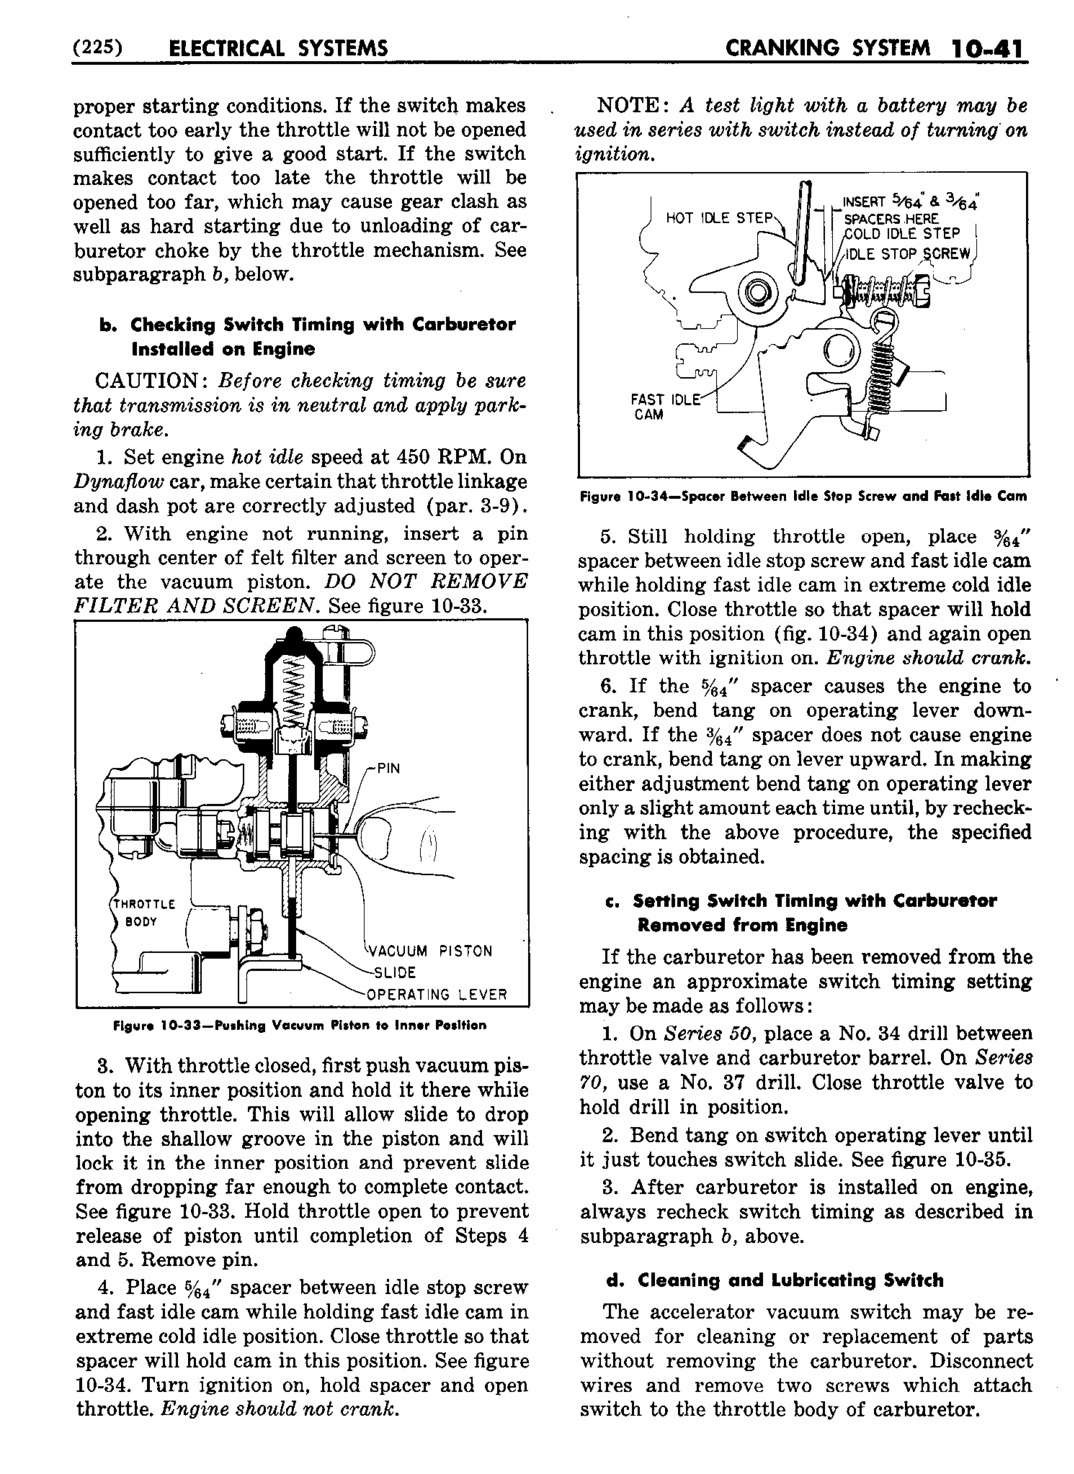 n_11 1953 Buick Shop Manual - Electrical Systems-041-041.jpg